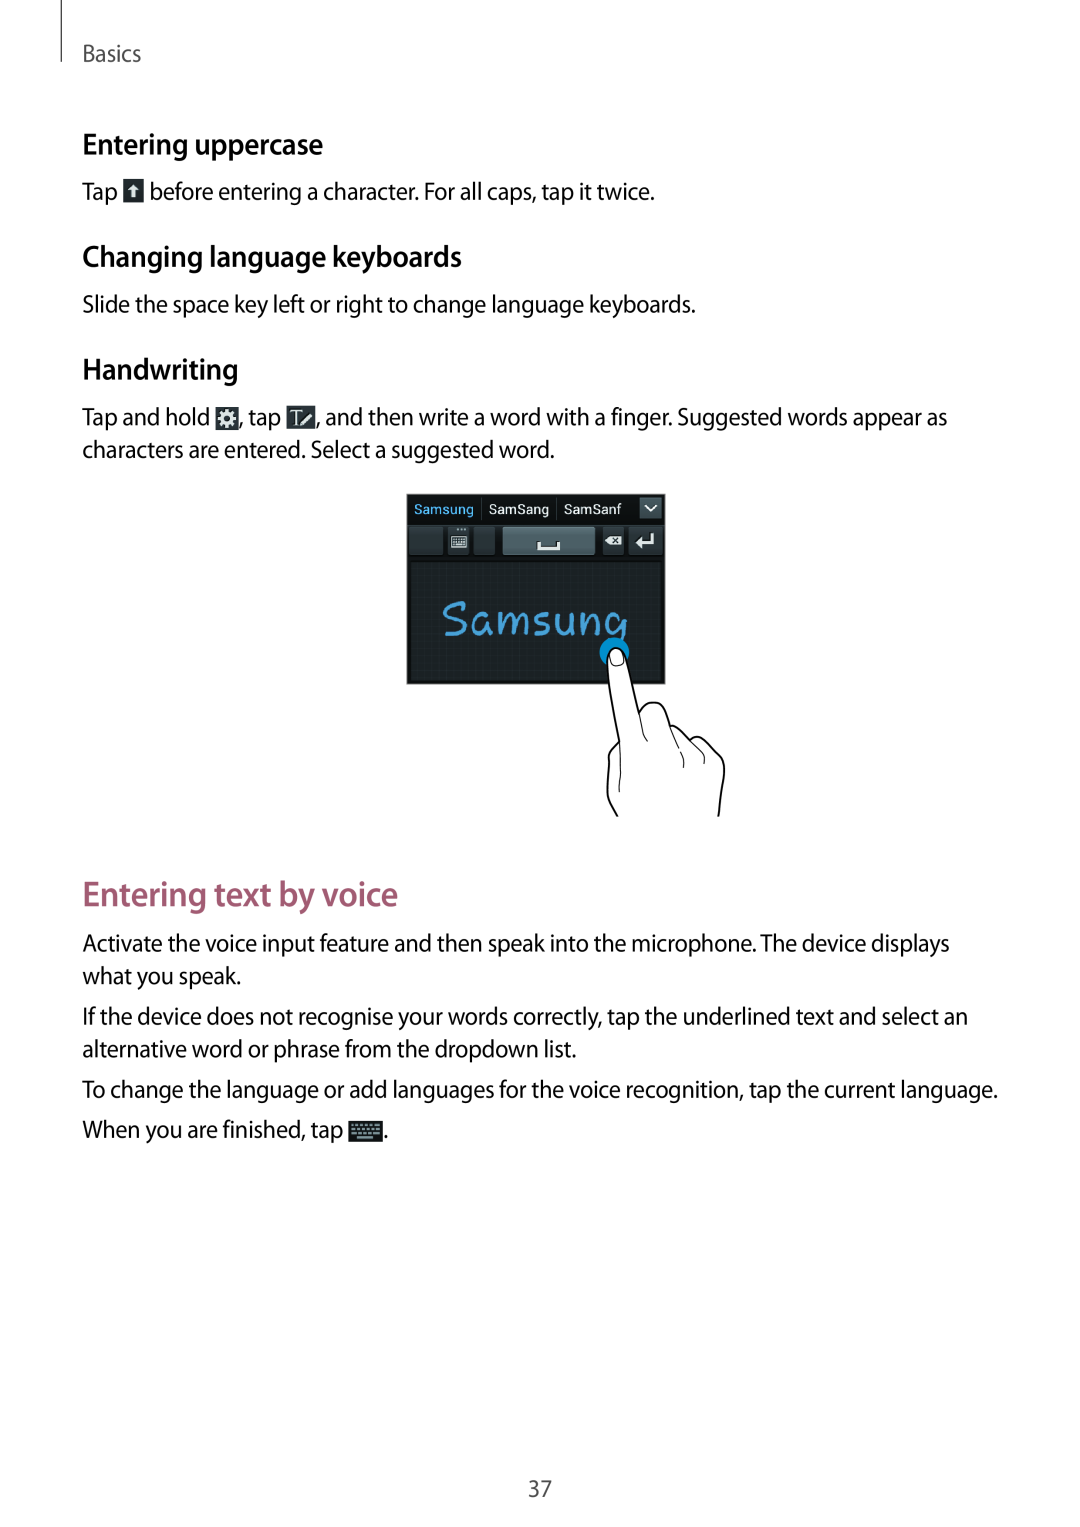 Samsung GT-I8190MBNVDC manual Entering text by voice, Entering uppercase, Changing language keyboards, Handwriting, Basics 